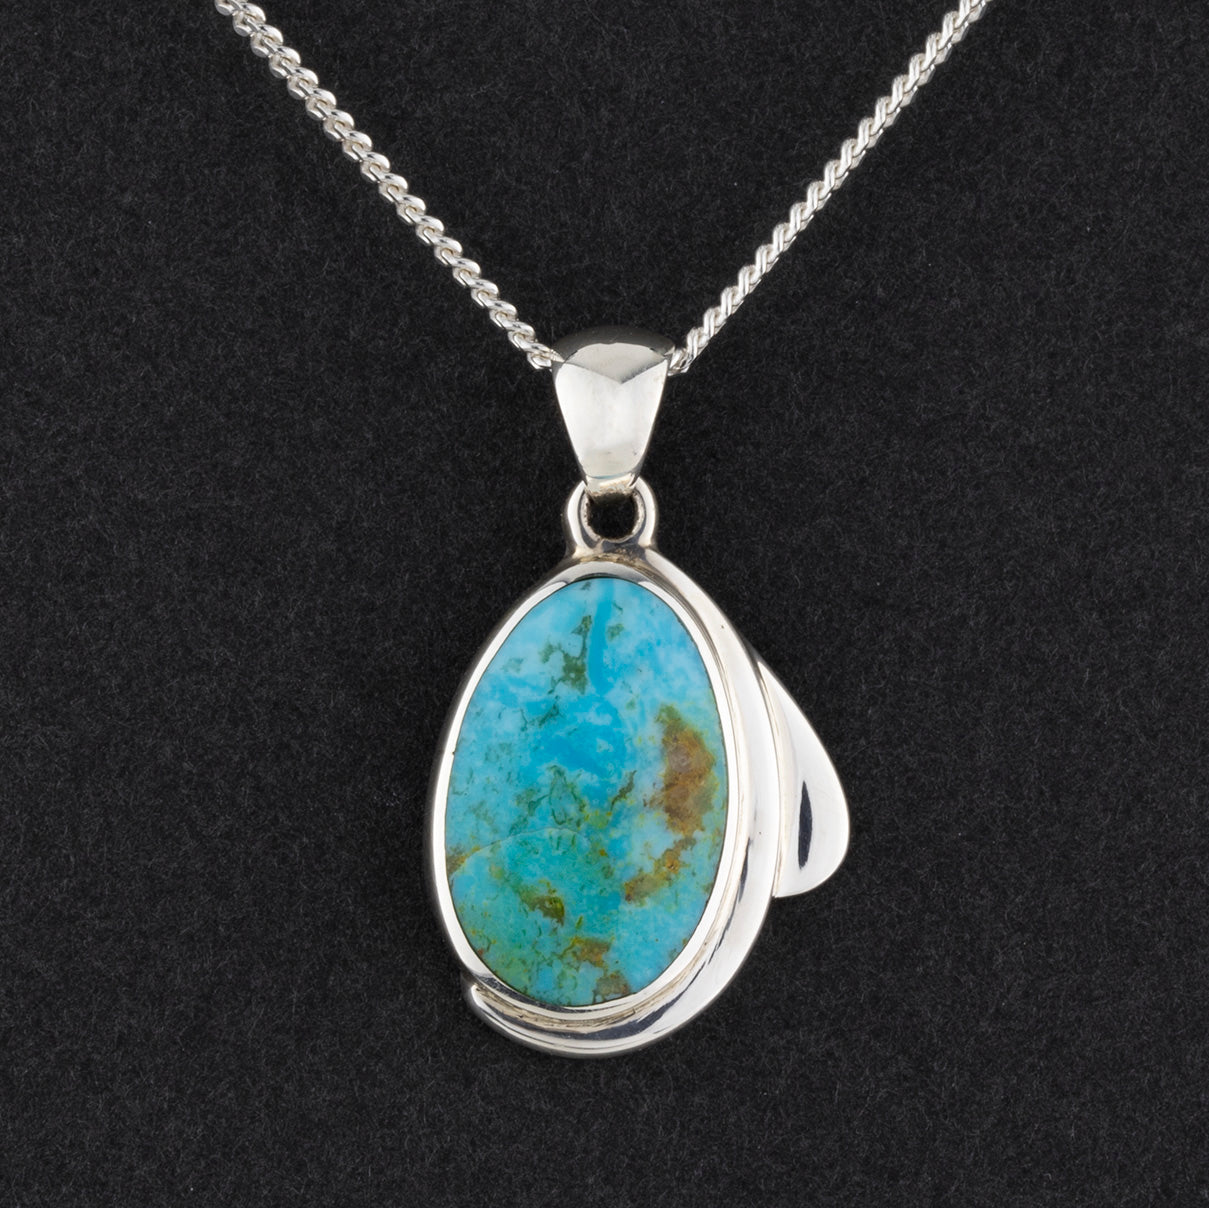 sterling silver and genuine turquoise pendant necklace